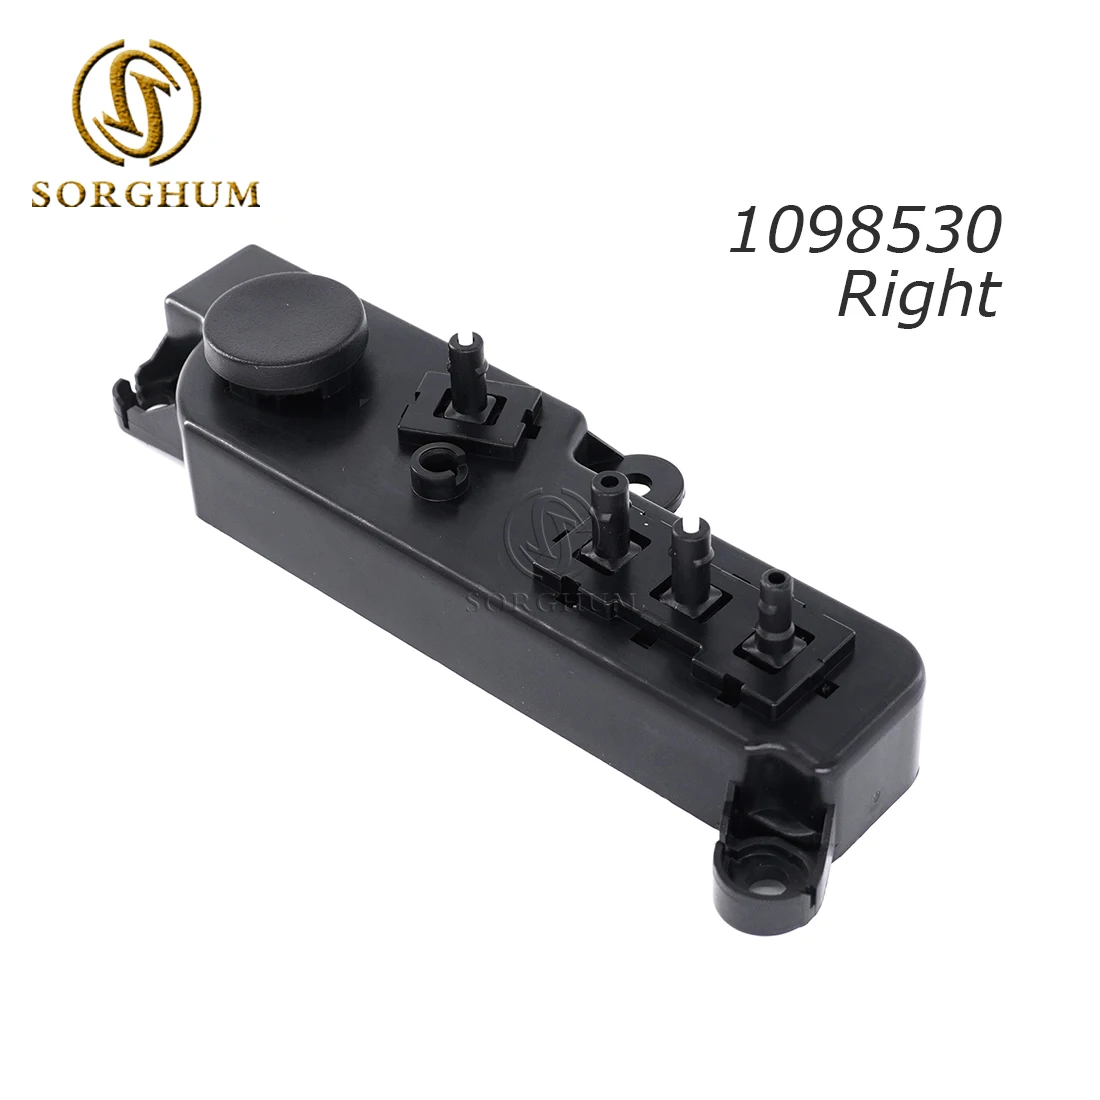 

Sorghum 1098530 Right Front Power Seat Adjustment Switch Regulator For Tesla Model 3 2017 2018 2019 2020 Car Accessories